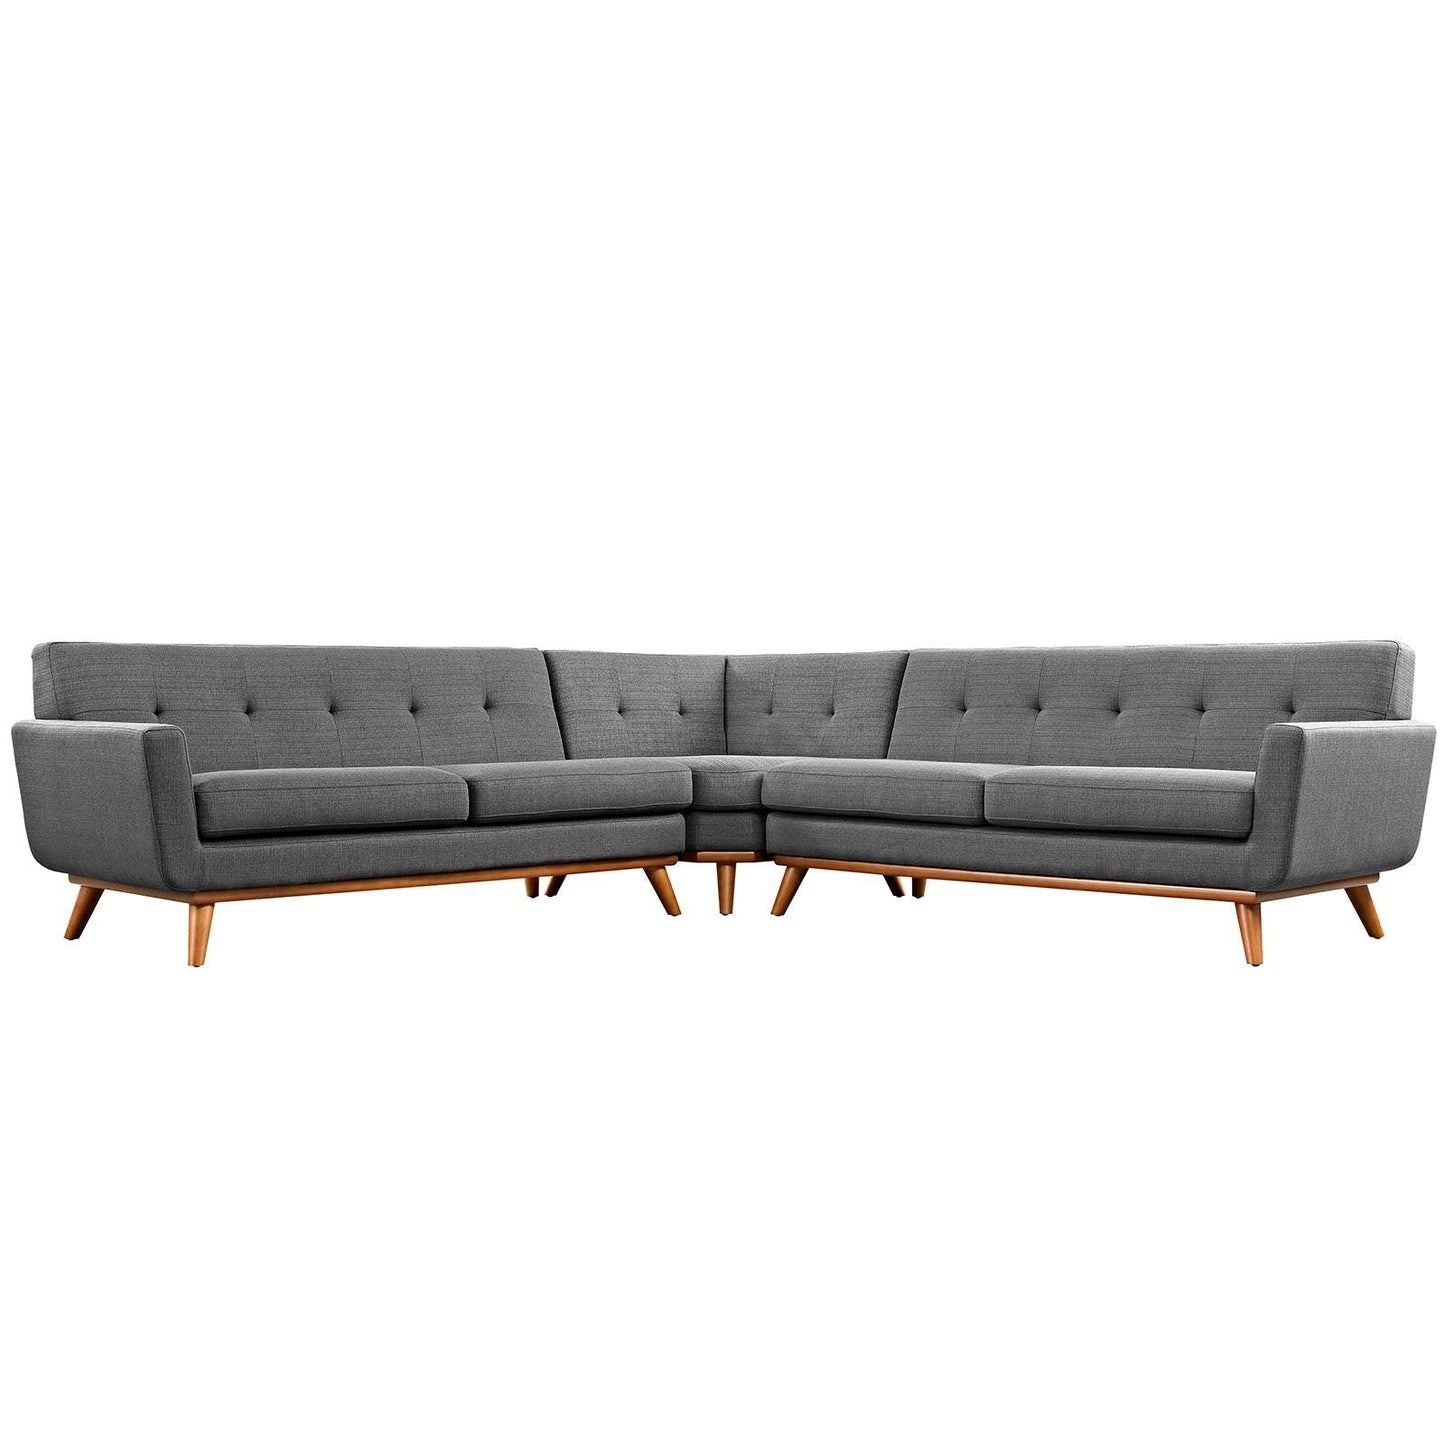 Modway Engage L-Shaped Upholstered Fabric Sectional Sofa FredCo